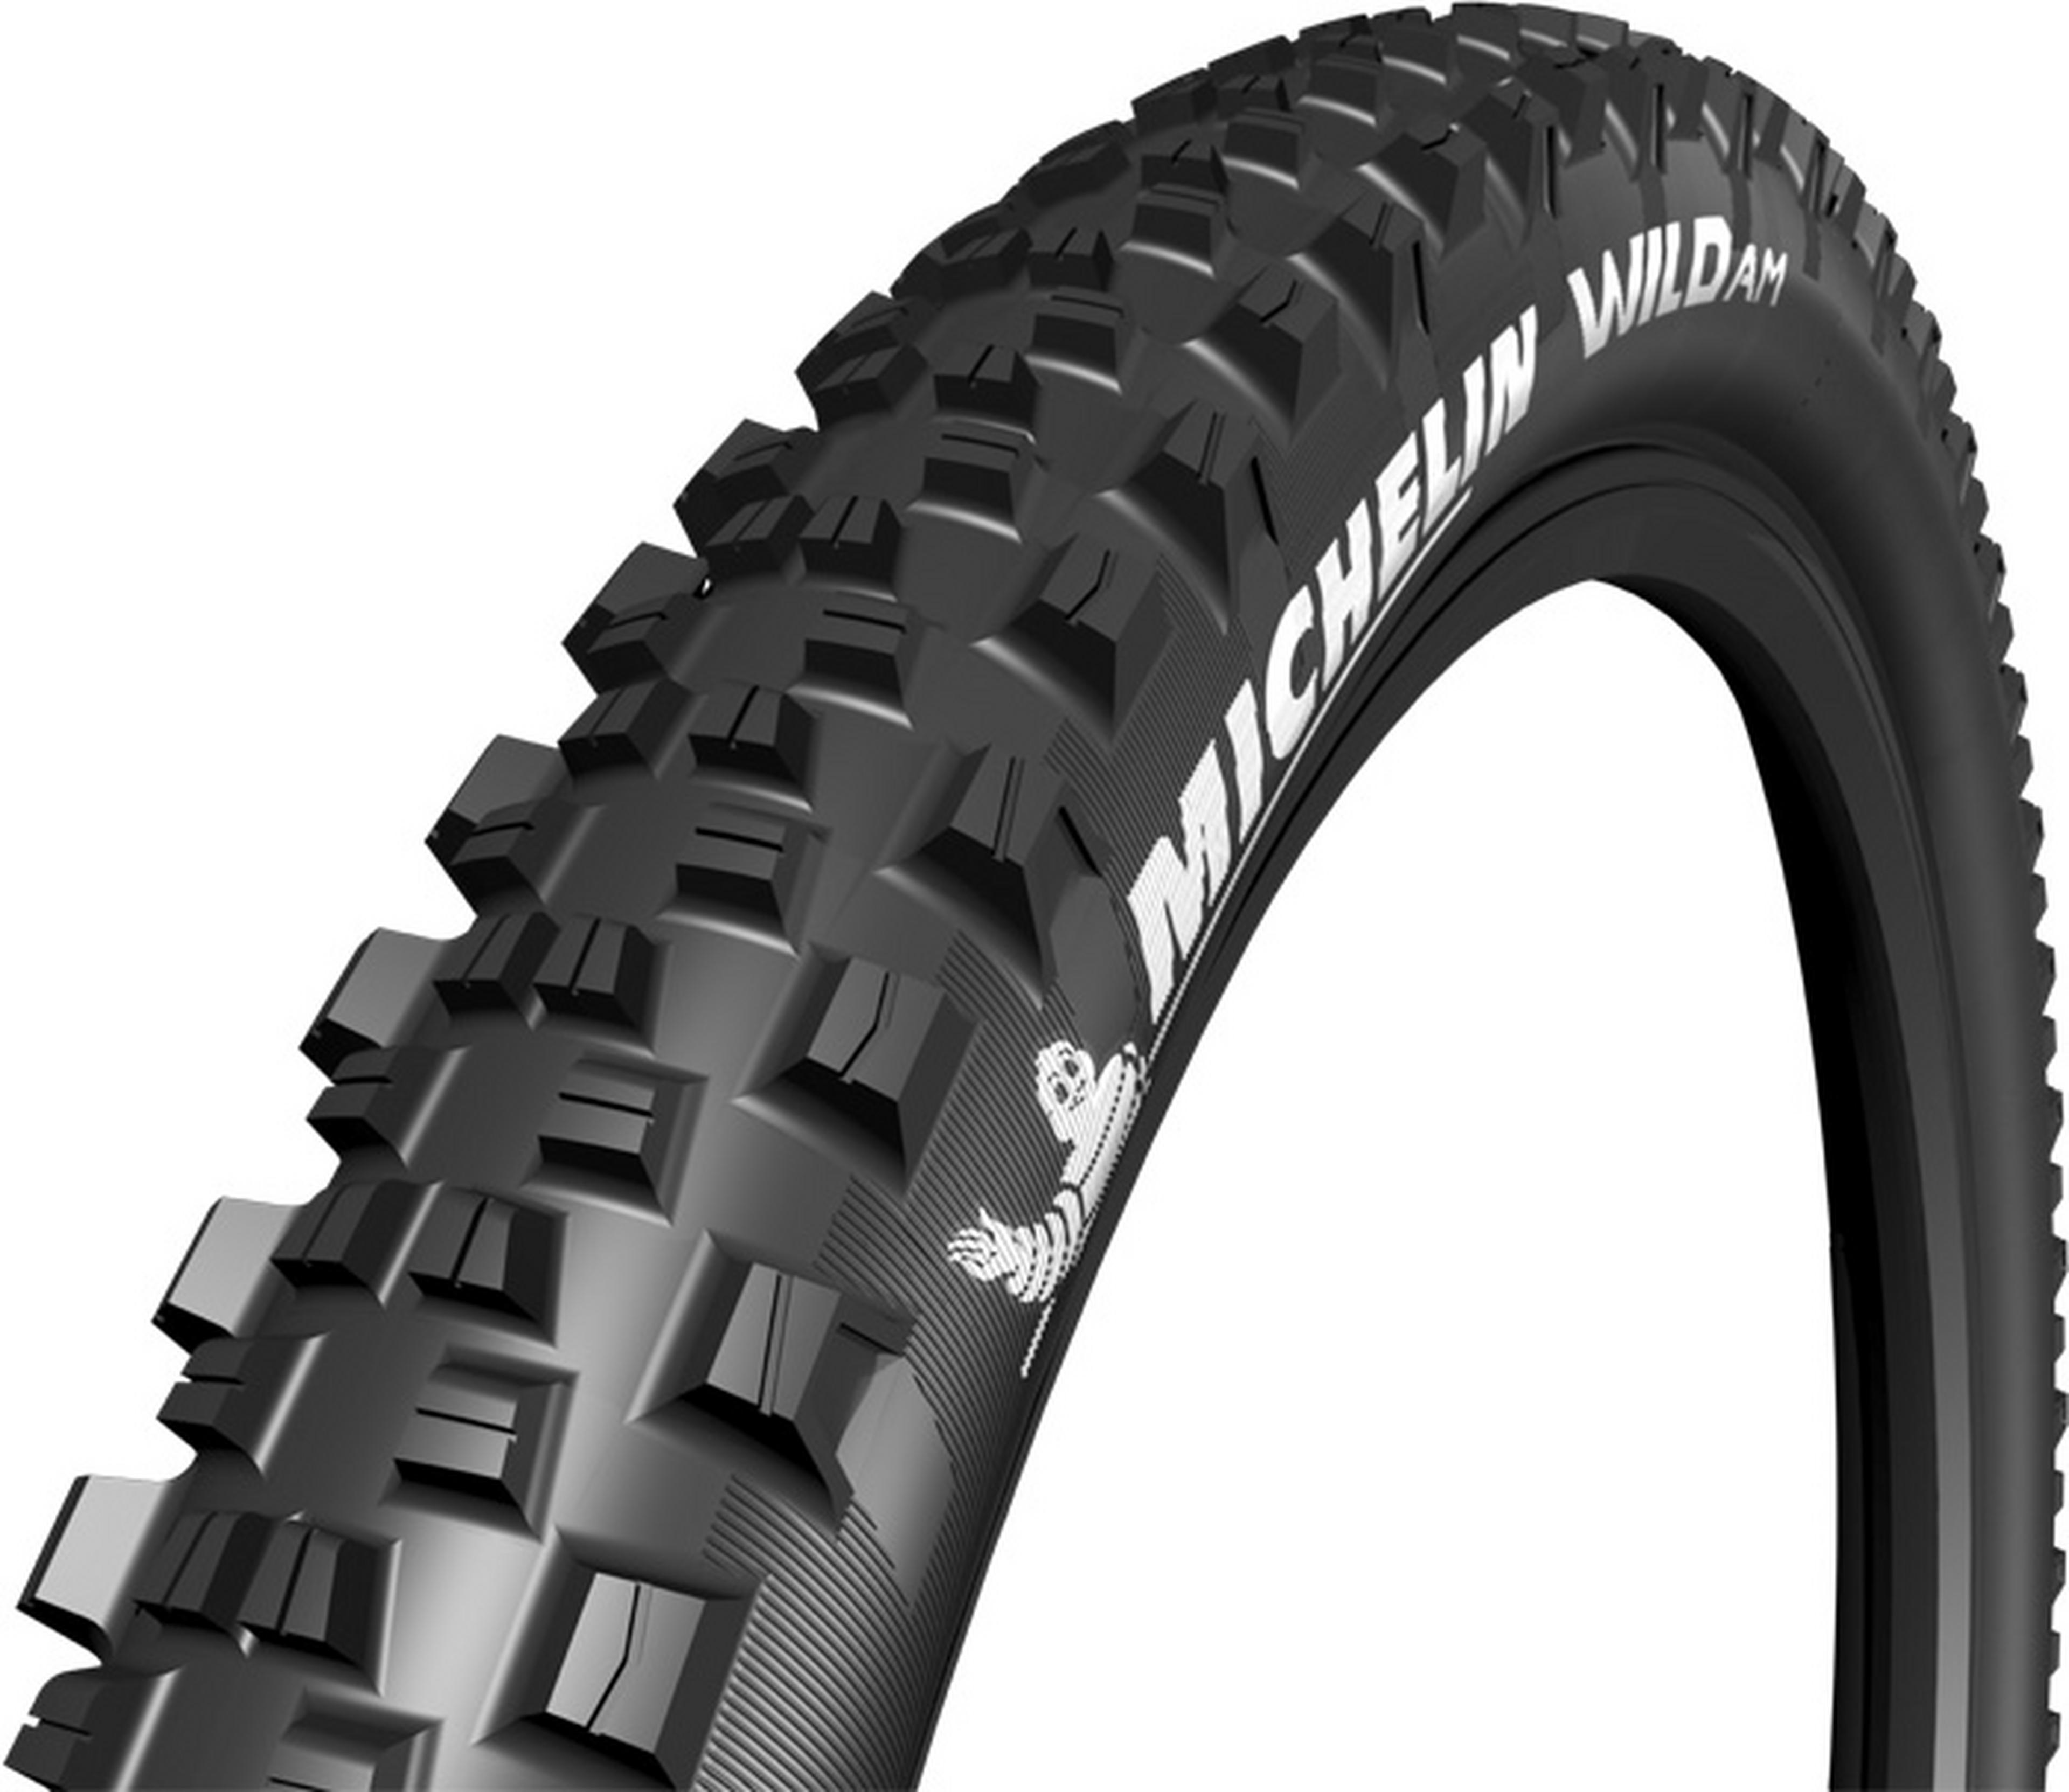 Michelin Wild AM Performance TLR MTB Tyre